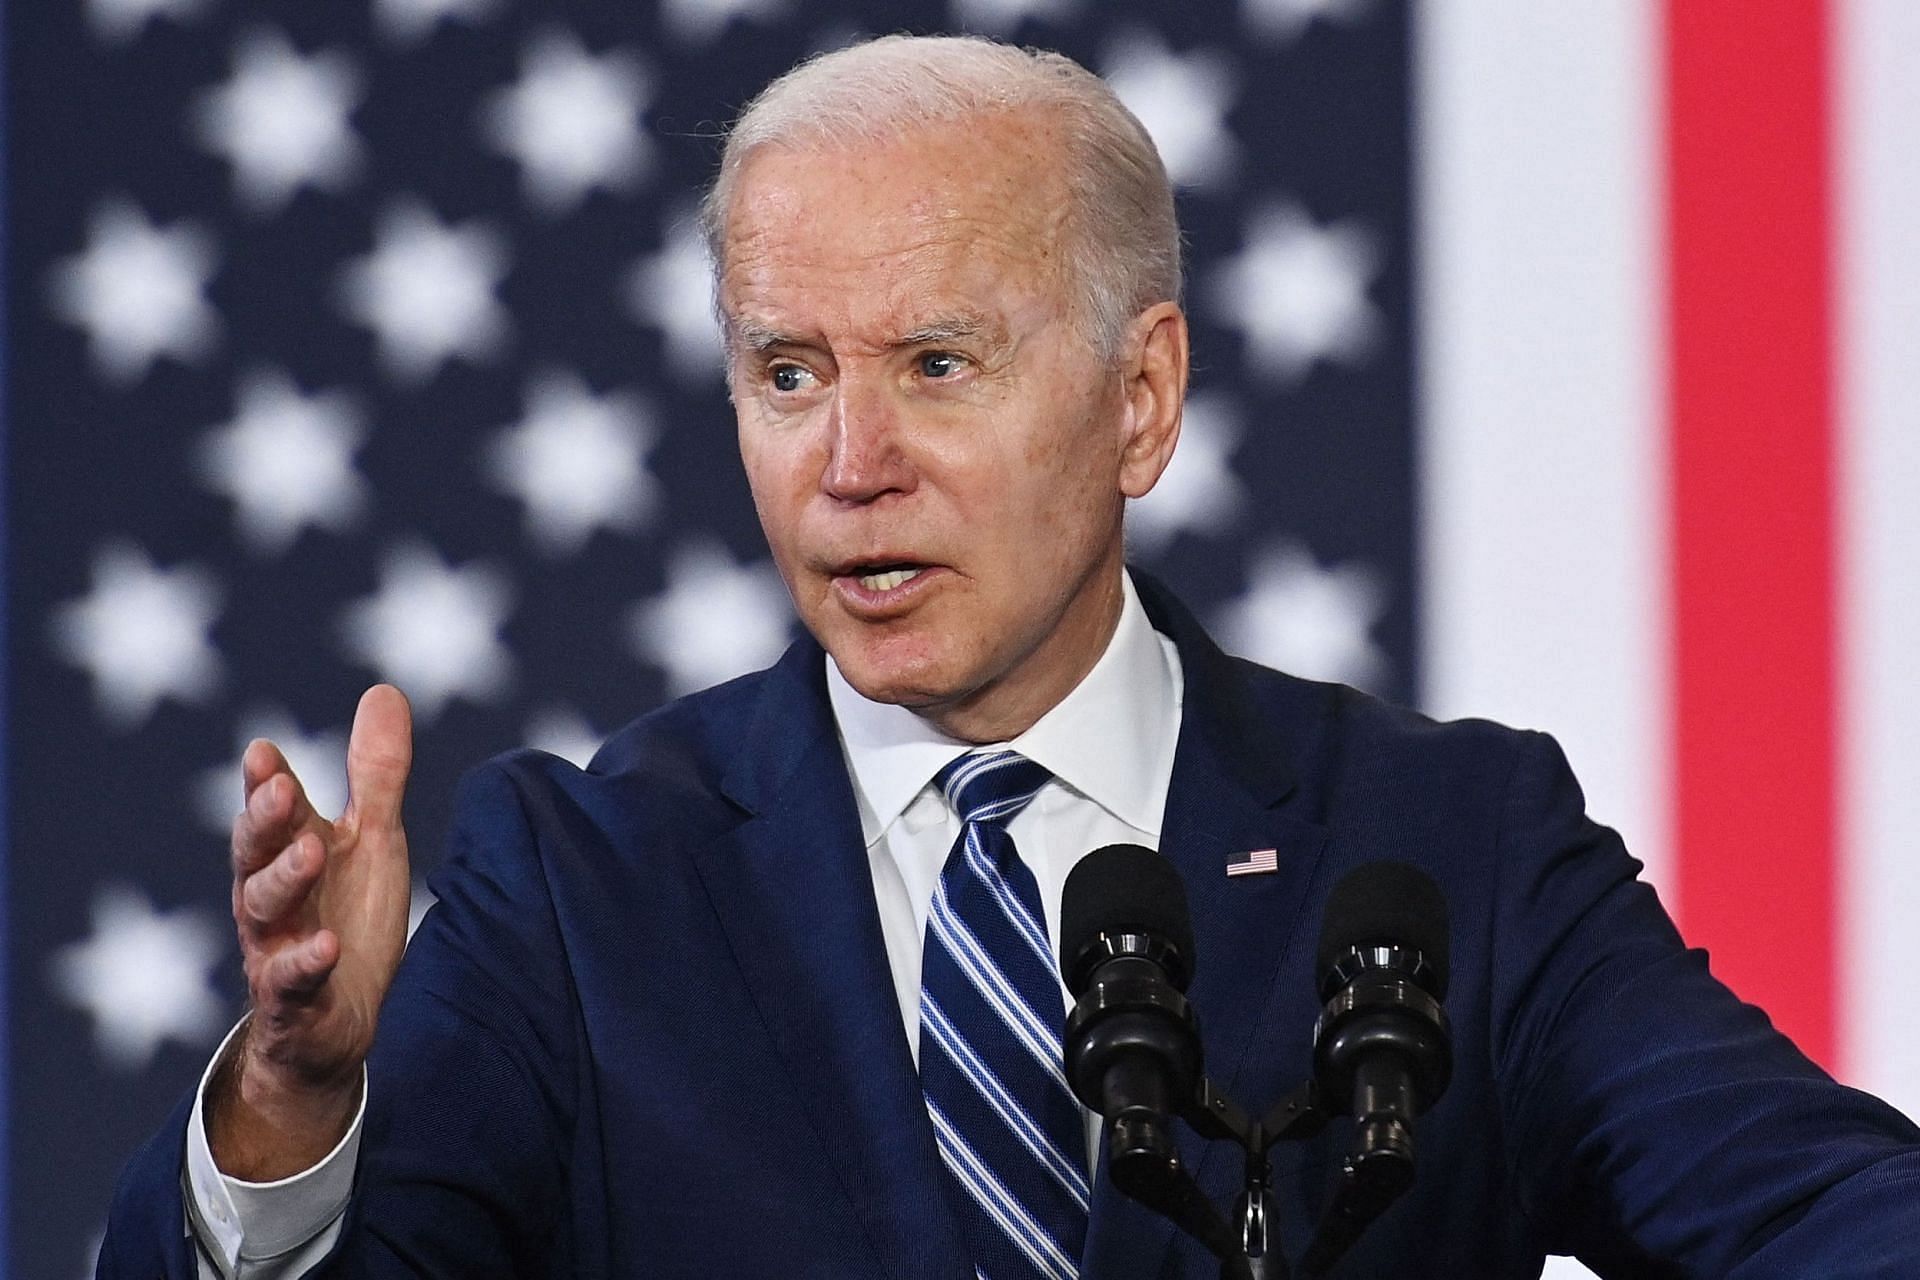 Joe Biden trolled for reading teleprompter instructions (Image via Getty Images)